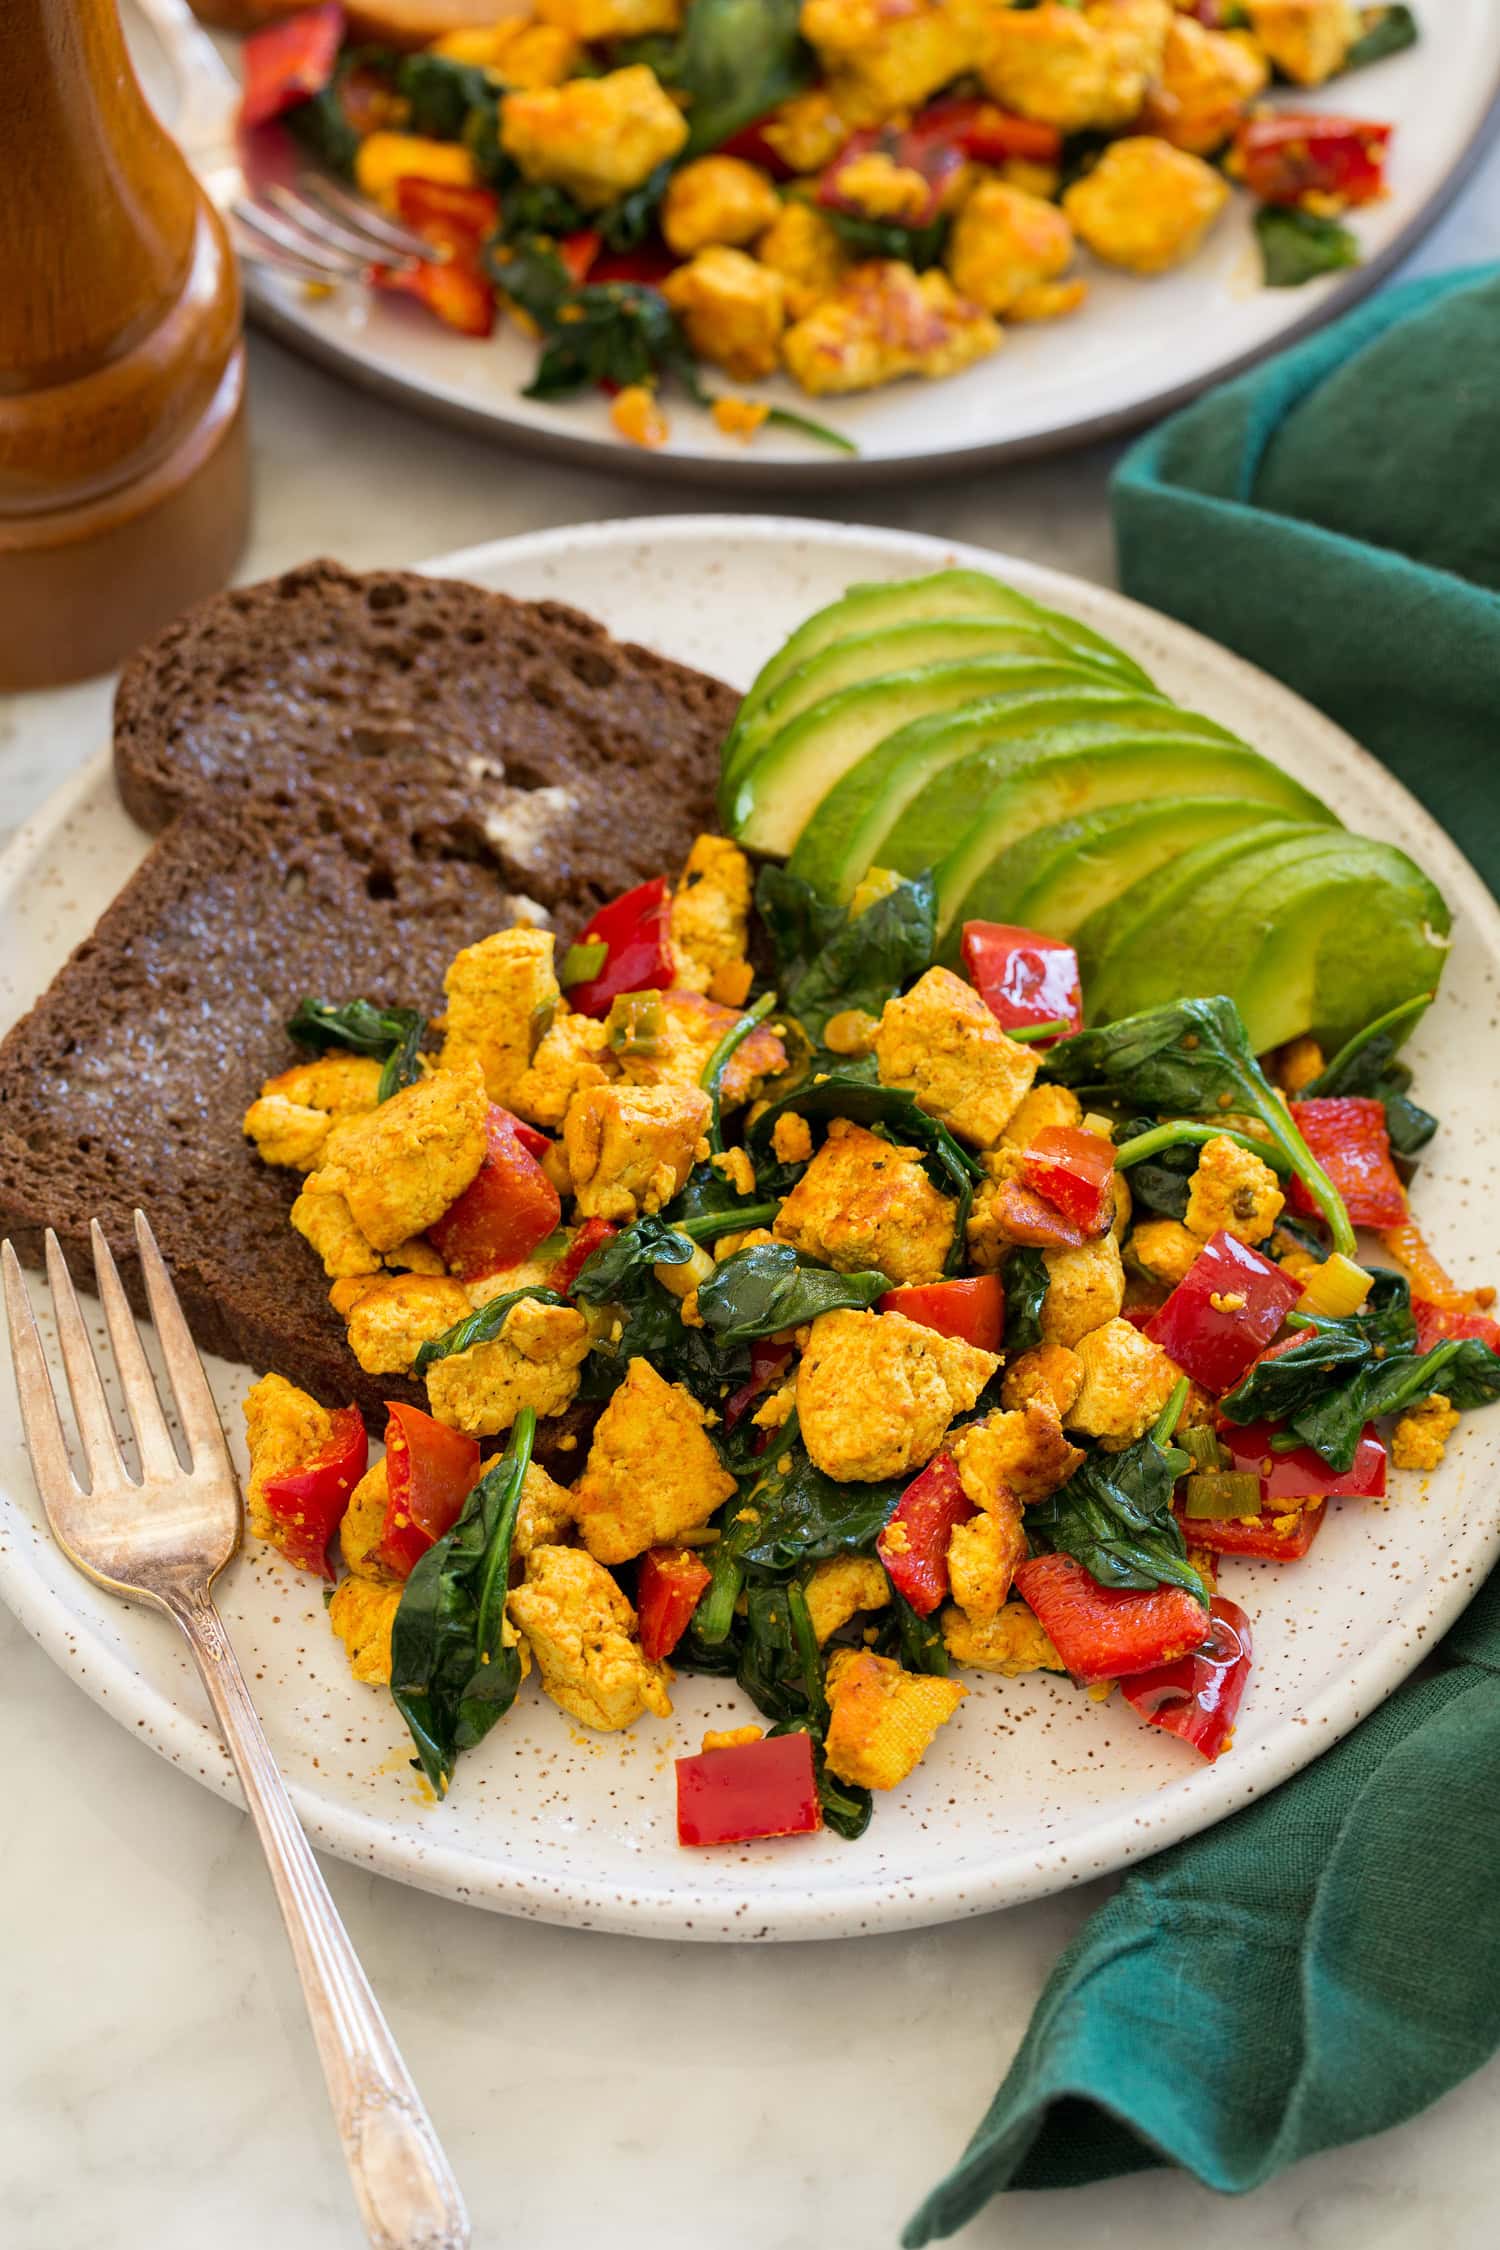 Tofu scramble shown with serving suggestions of avocado and whole grain toast.